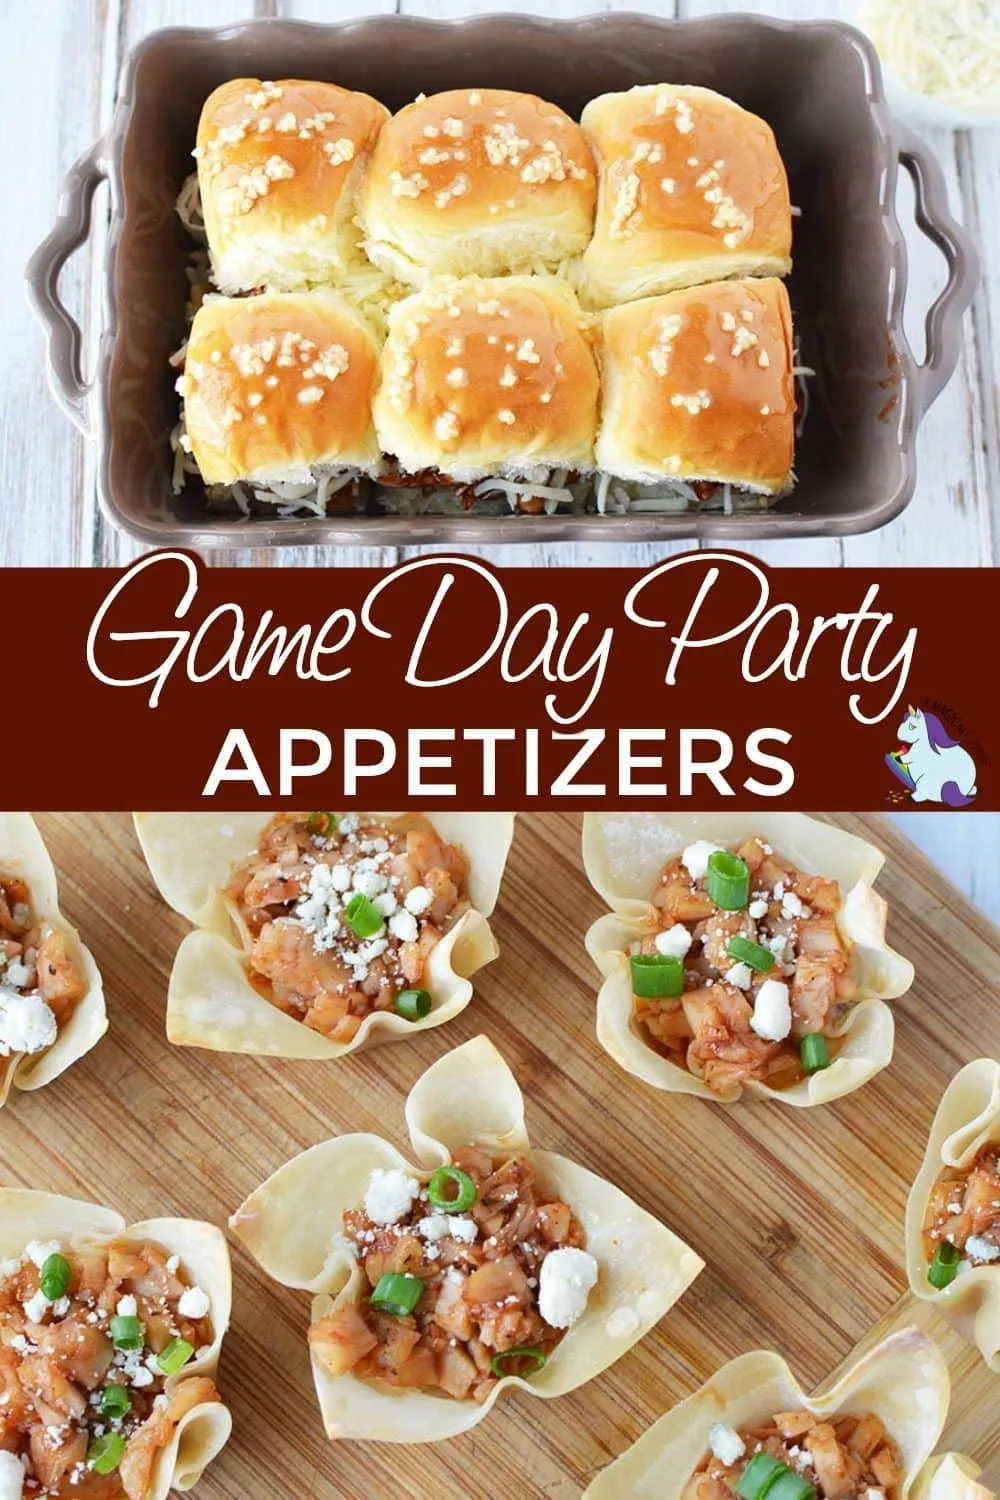 Sliders and bites that are great for game day snacks.